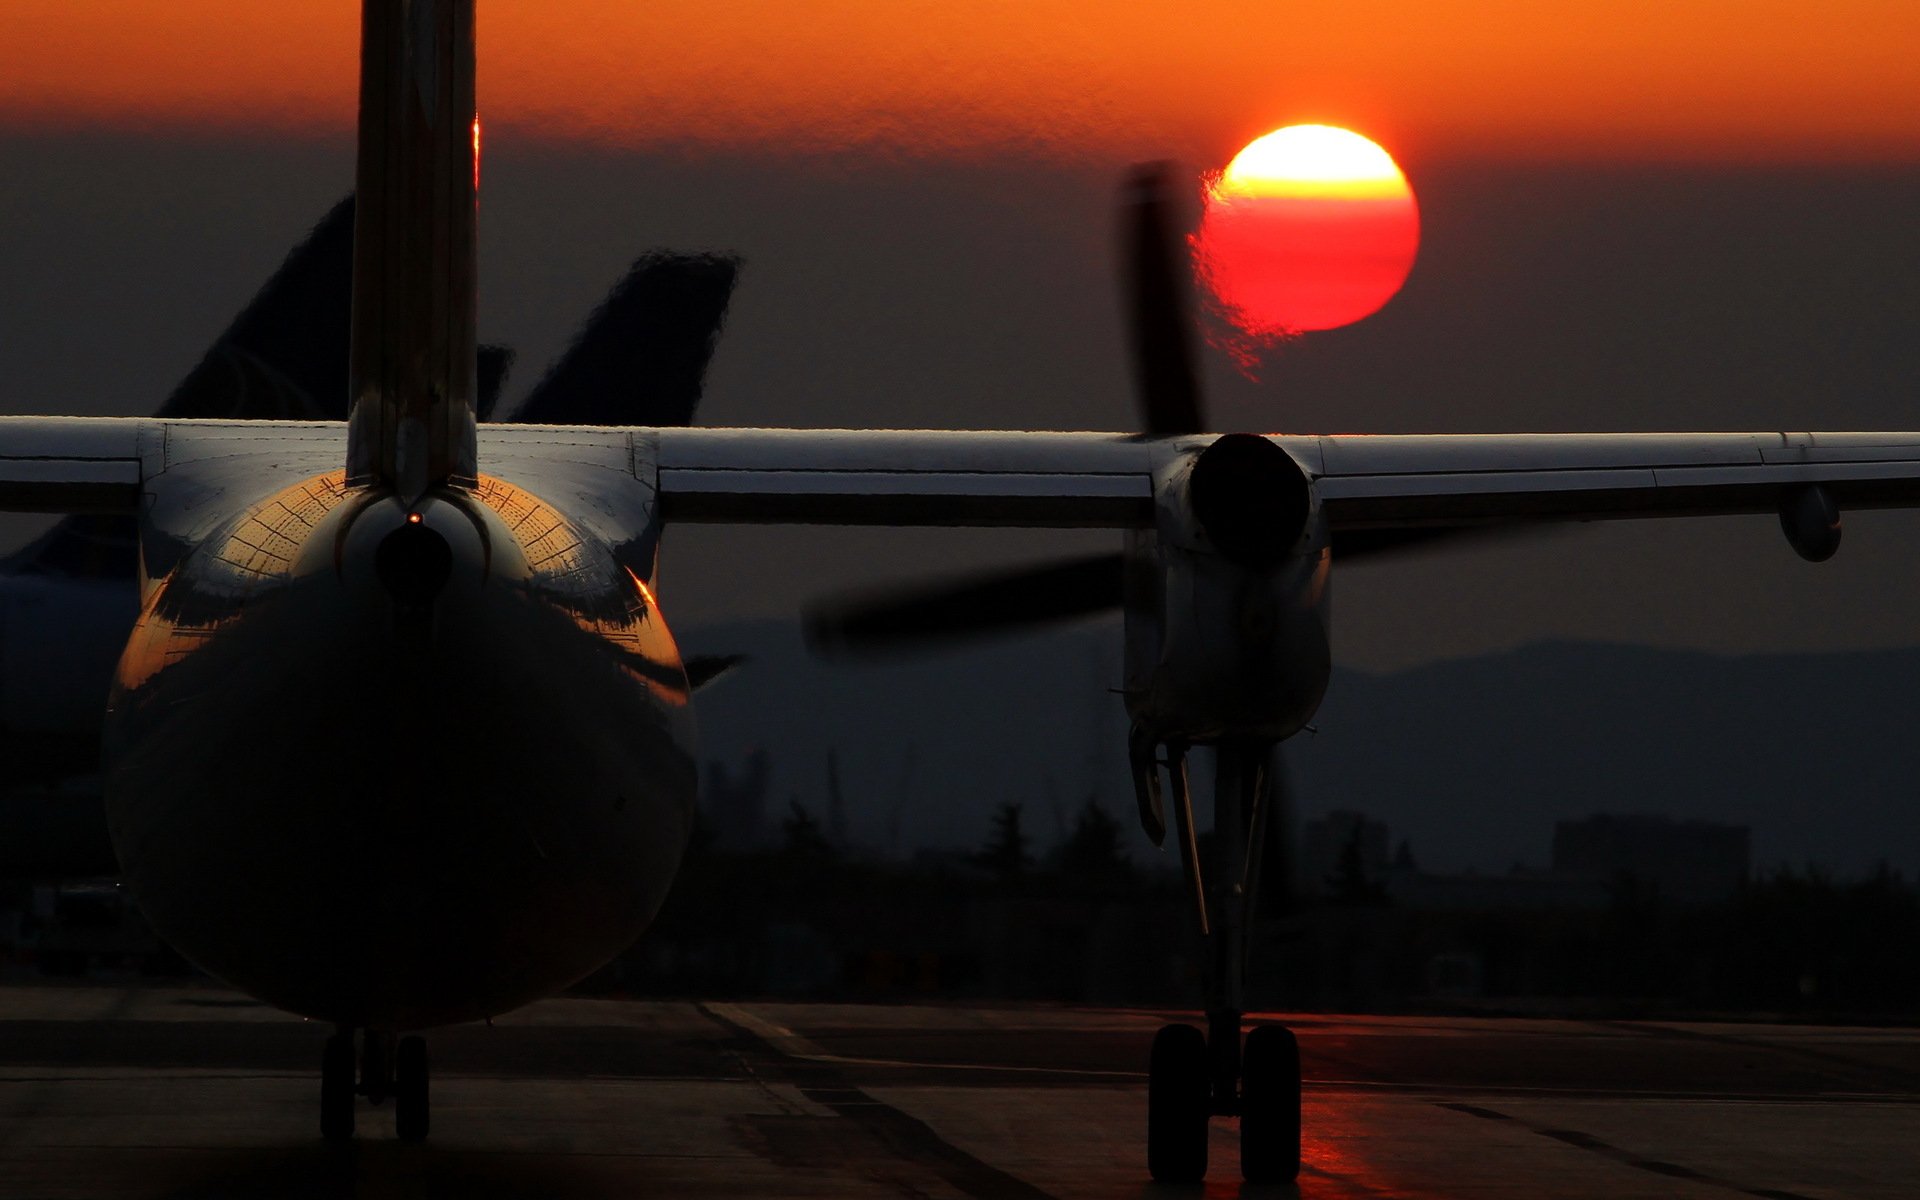 aircraft, Aircrafts, Airplane, Jet, Fly, Sunset, Sun, Photography, Cars, Vehicles Wallpaper